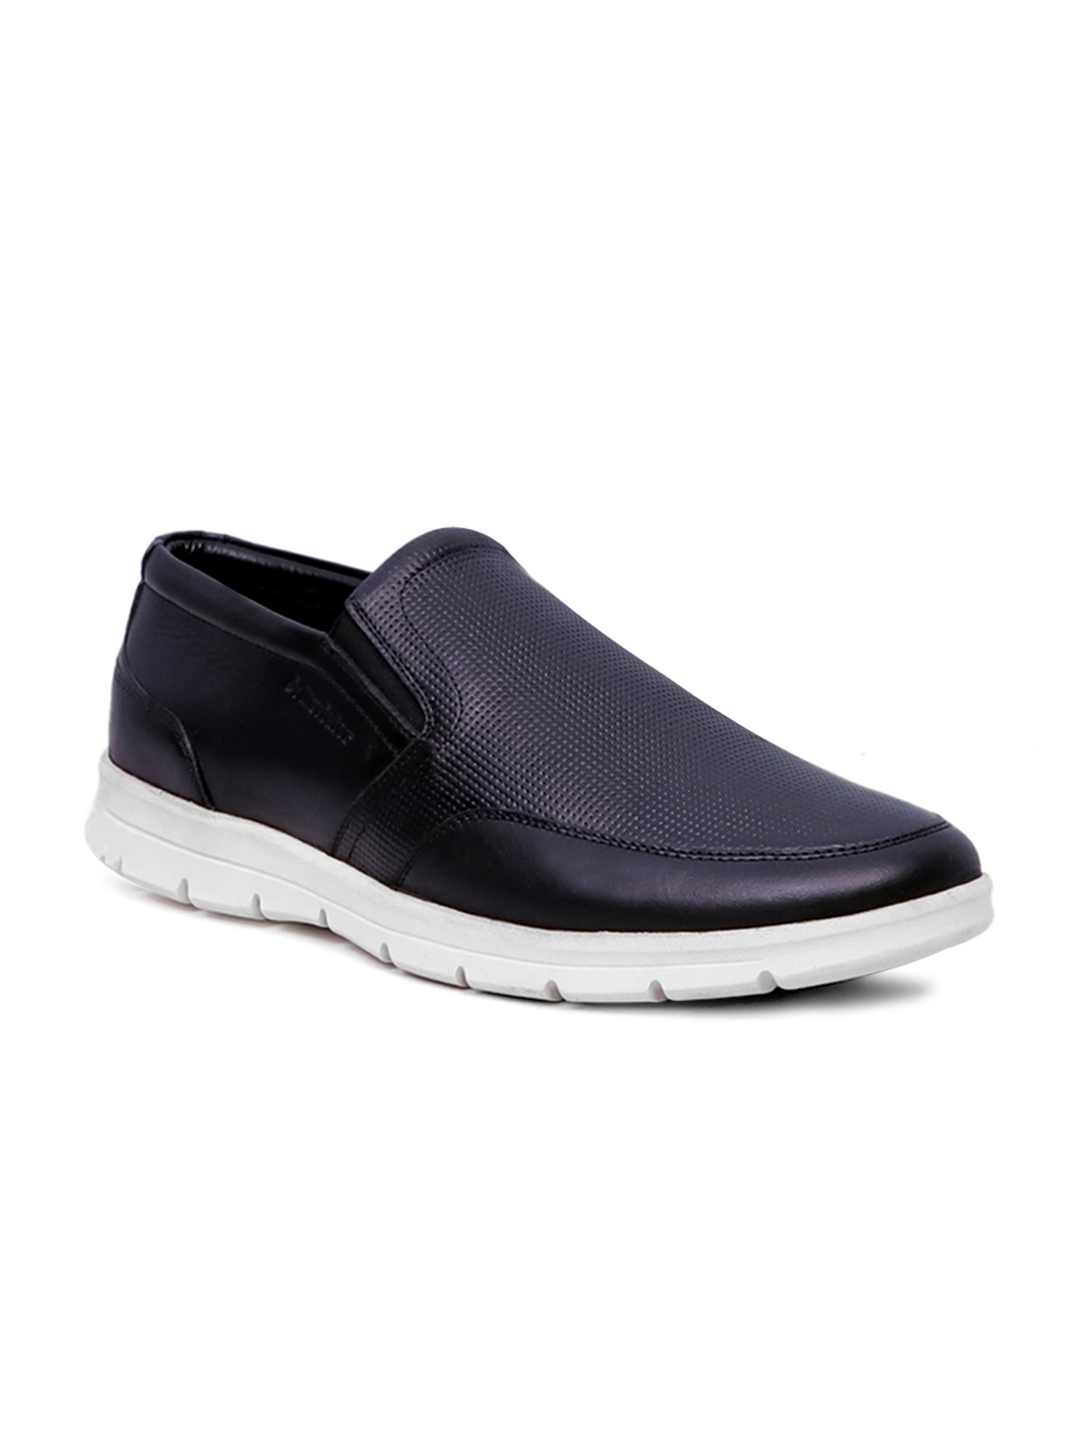 Buy Alleviater Men Black Slip On Leather Sneakers - Casual Shoes for ...